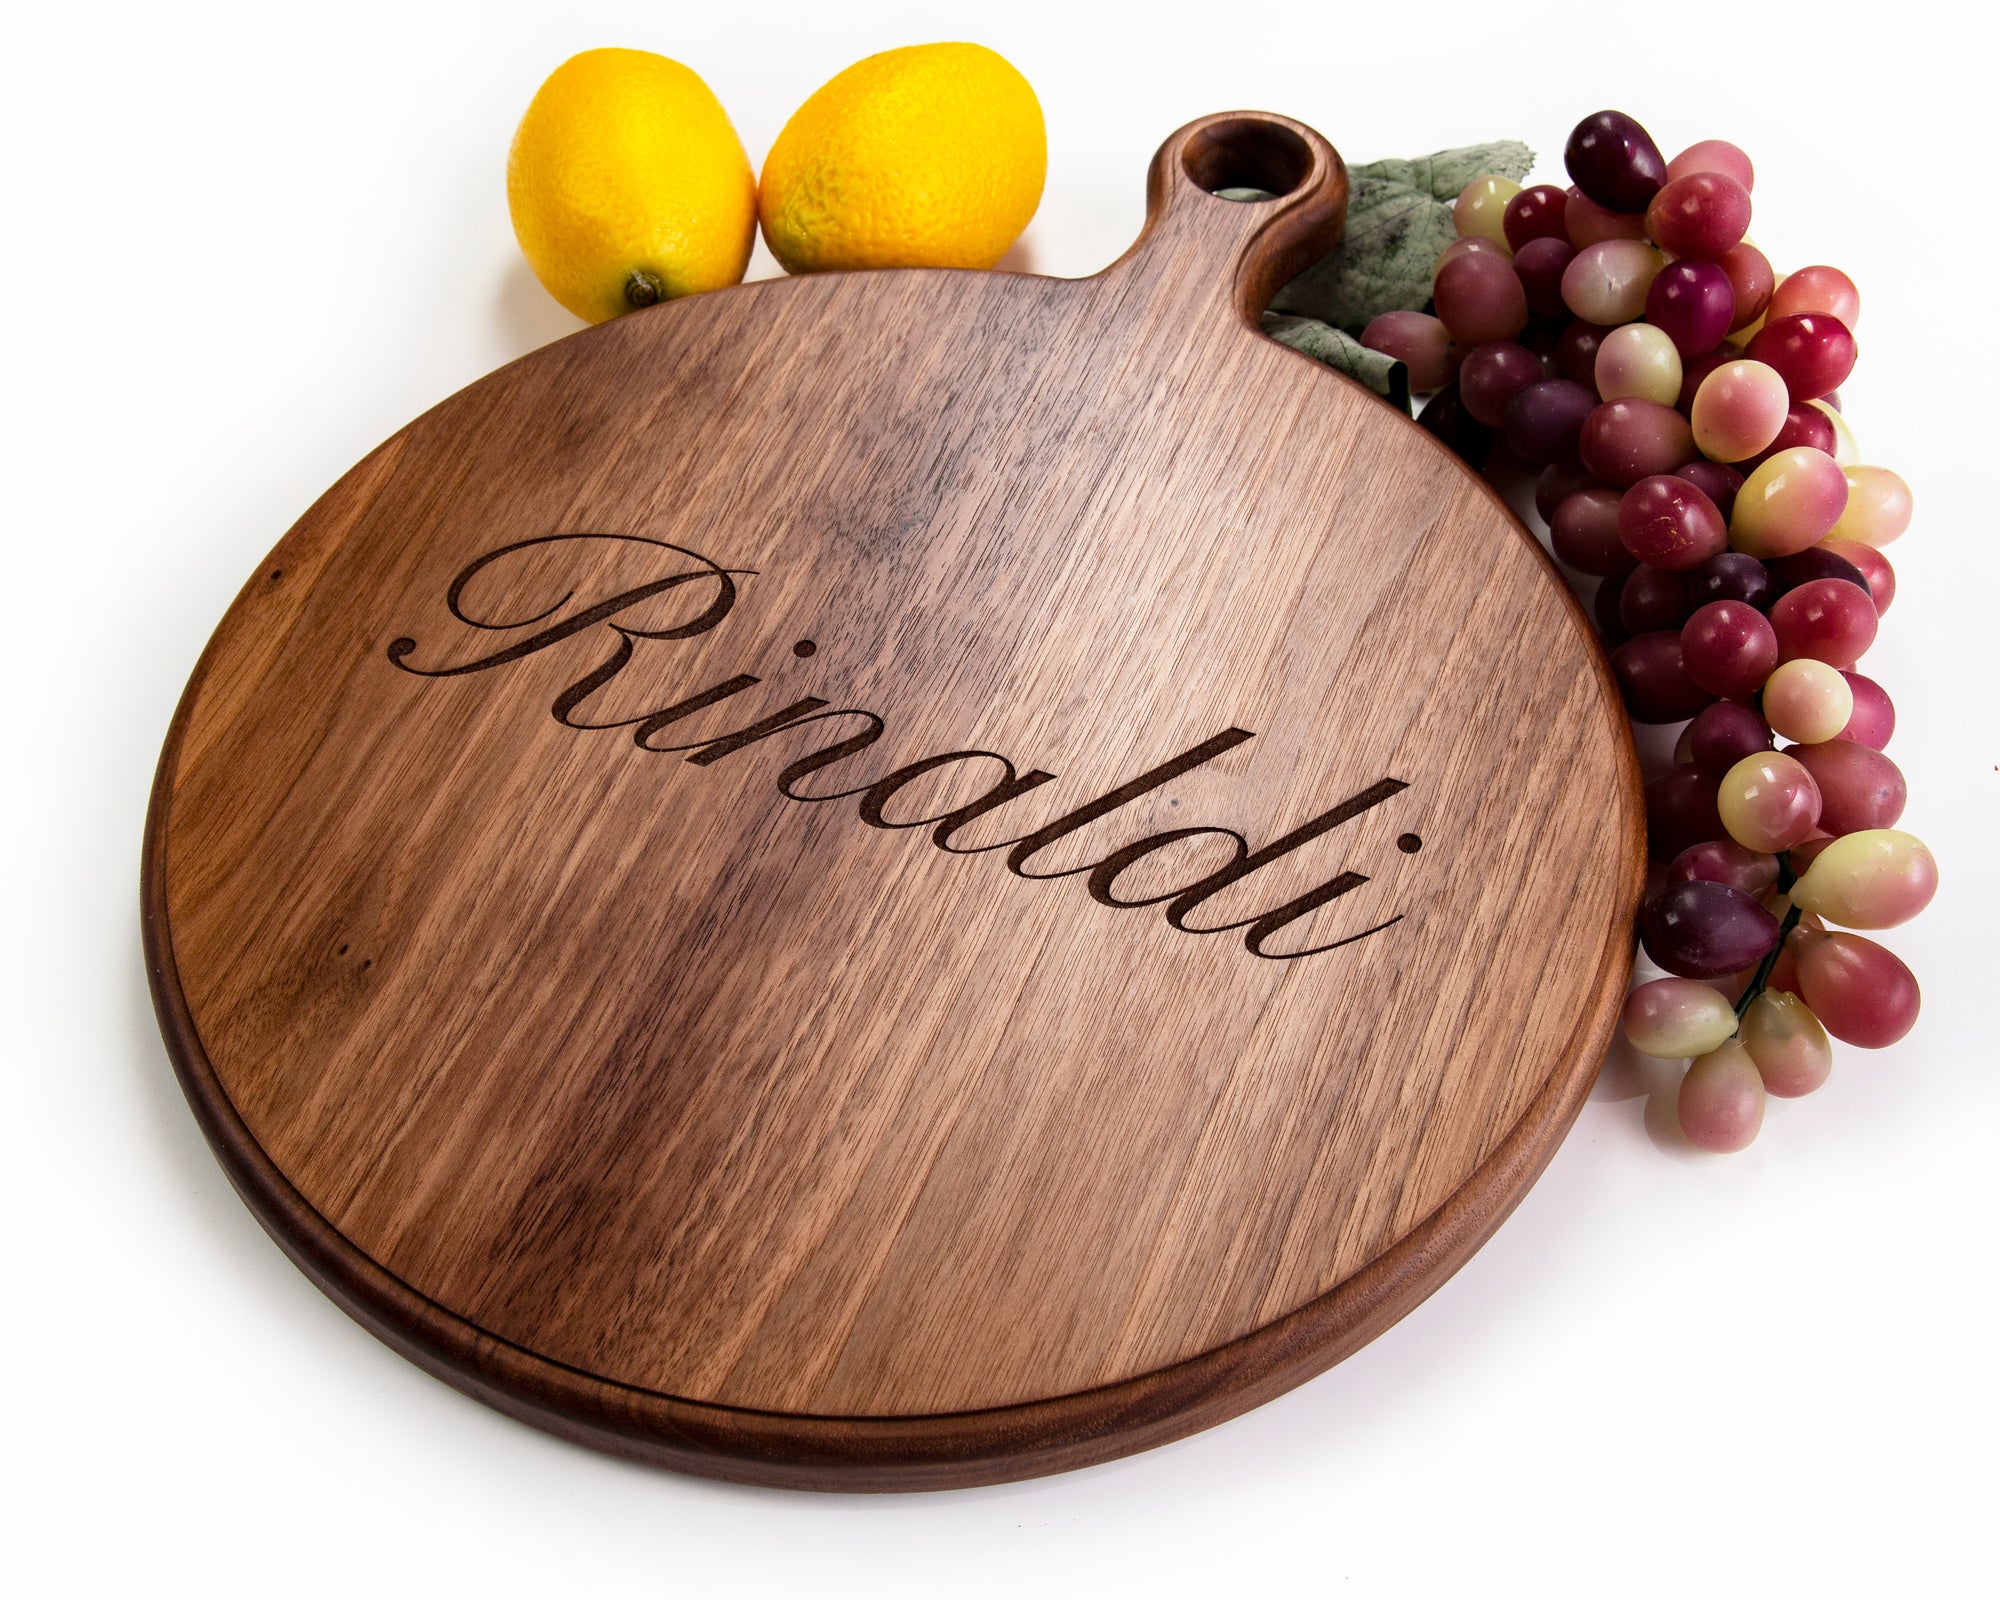 This Round Personalized Charcuterie Board is the perfect gift for any occasion. Crafted from quality wood, its timeless design guarantees long-lasting performance. A leather hanging strap adds an elegant touch, while a personalized engraving makes it an extra special gift. Suitable for a housewarming, wedding, or any other celebration, this charcuterie board is the perfect way to show your appreciation.